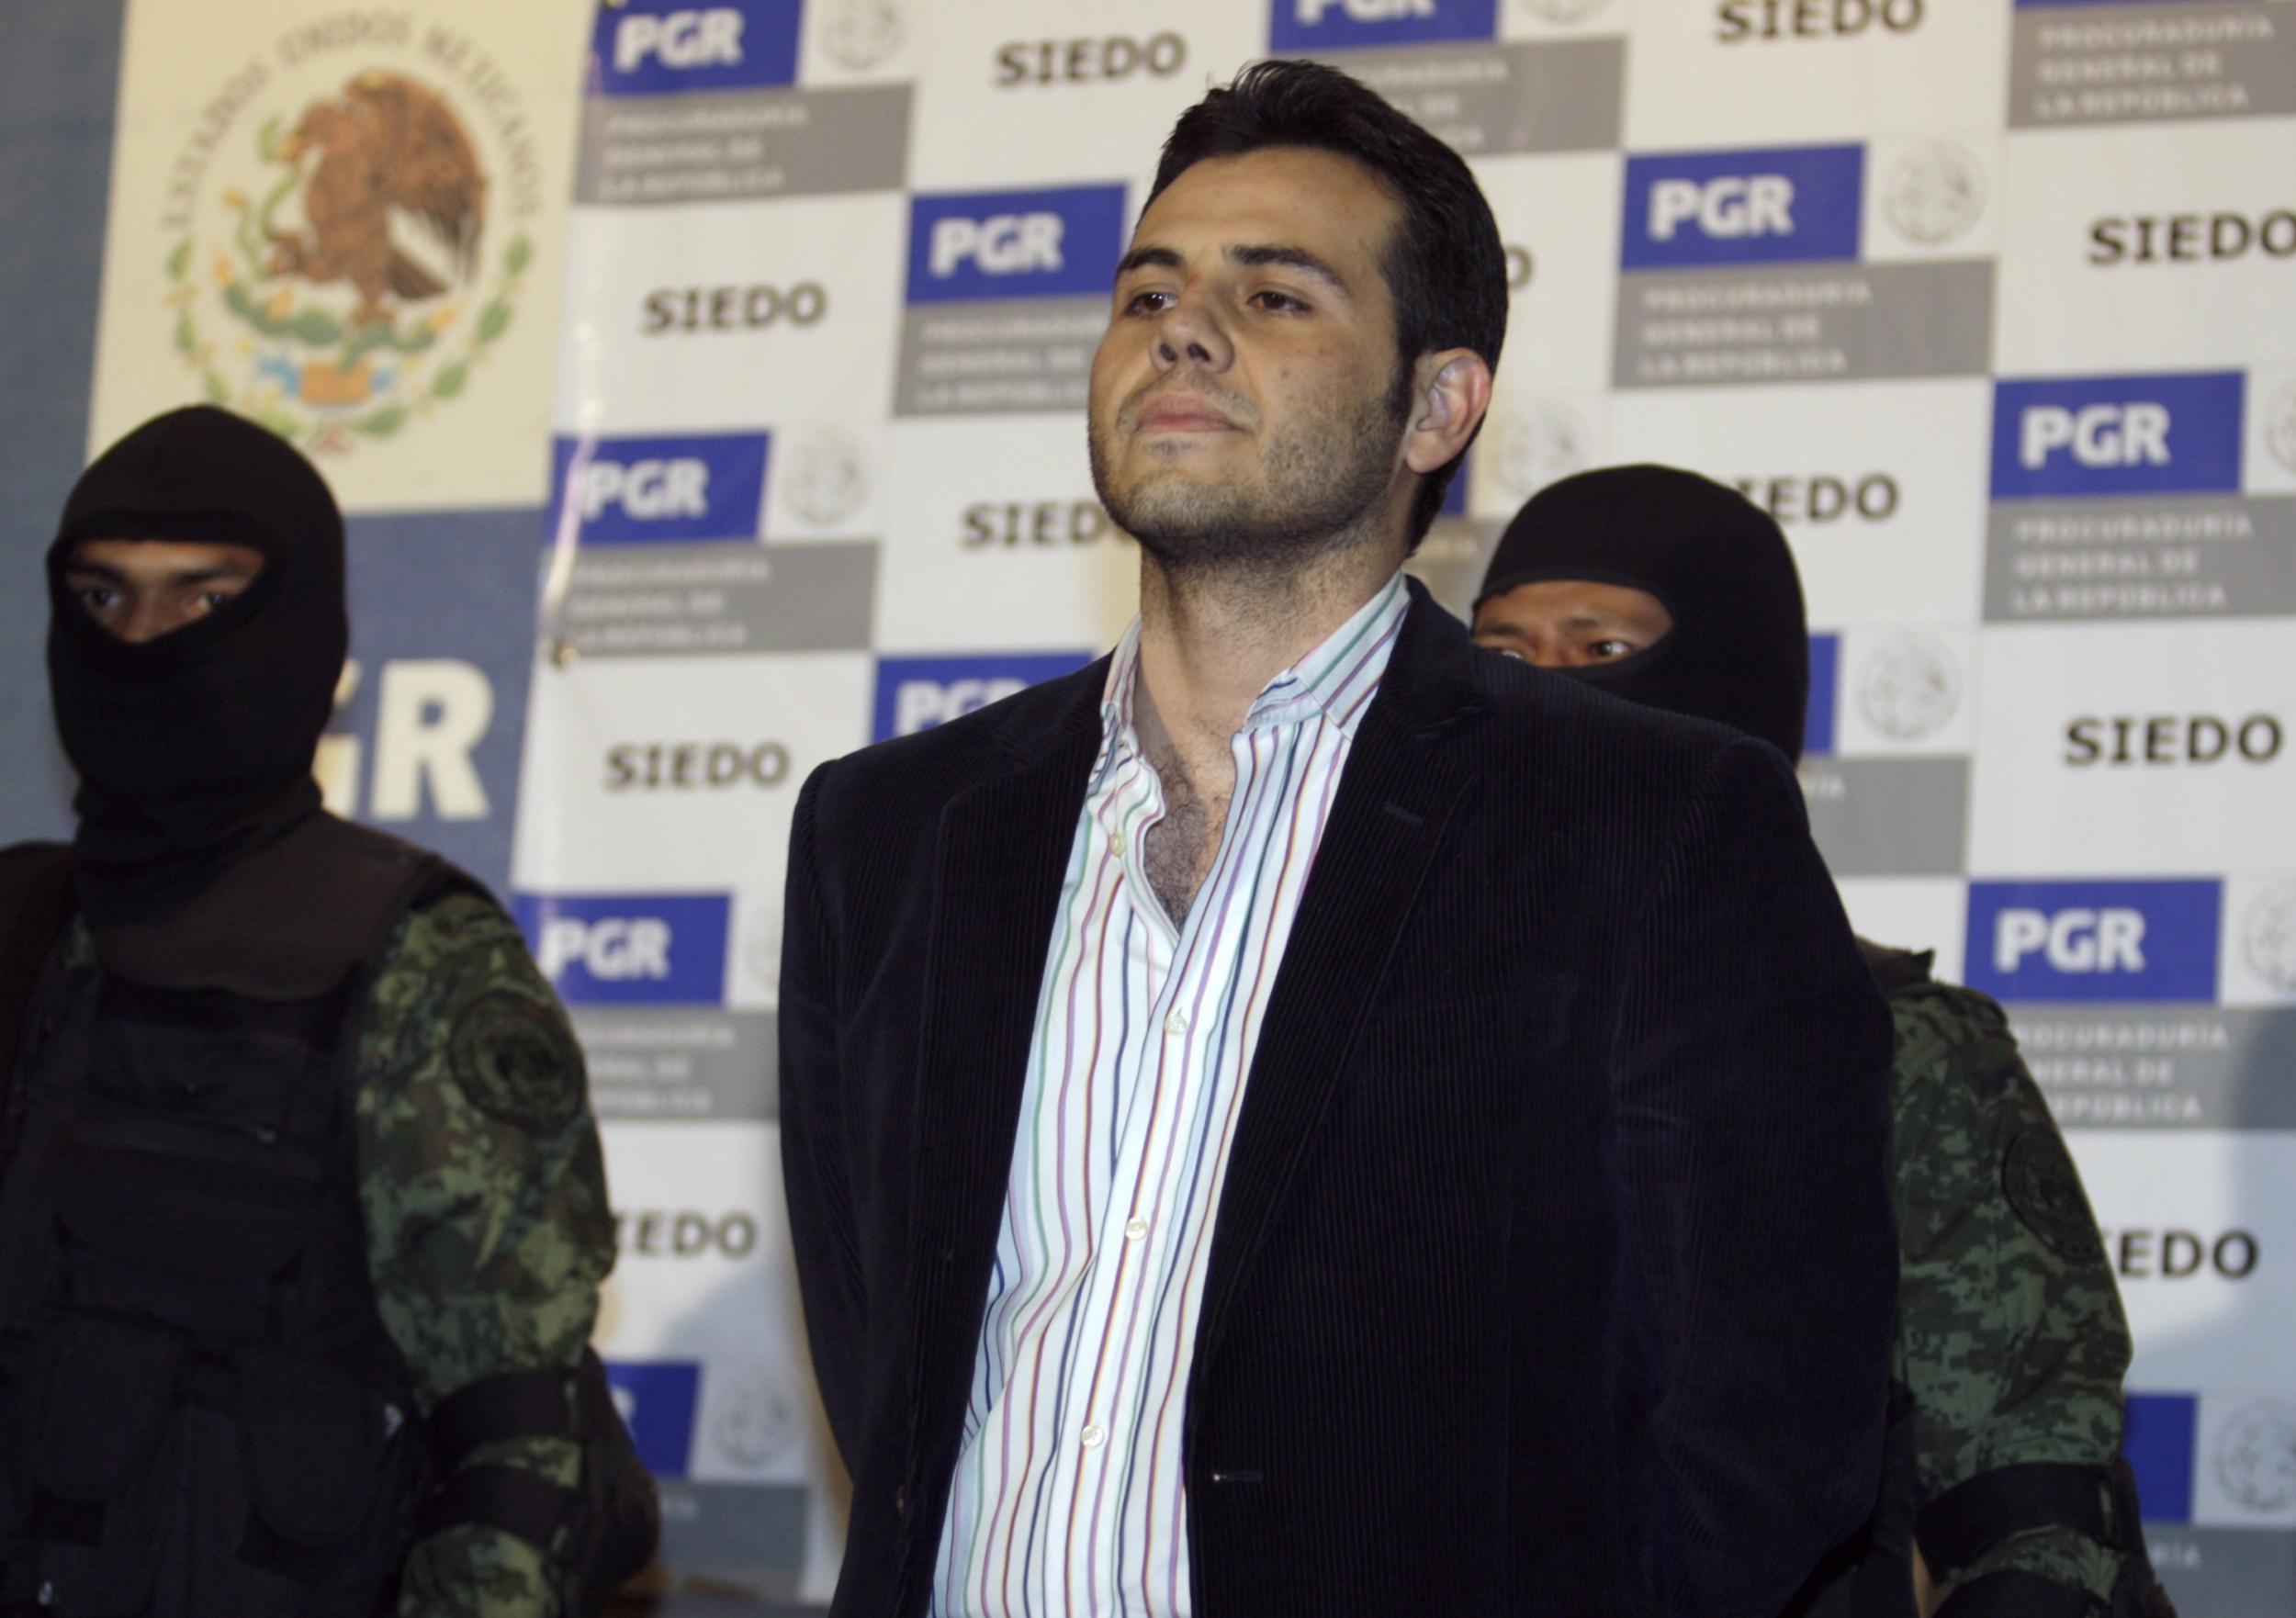 Mexican drug trafficker Vicente Zambada Niebla is presented to the media in Mexico City March 19, 2009.